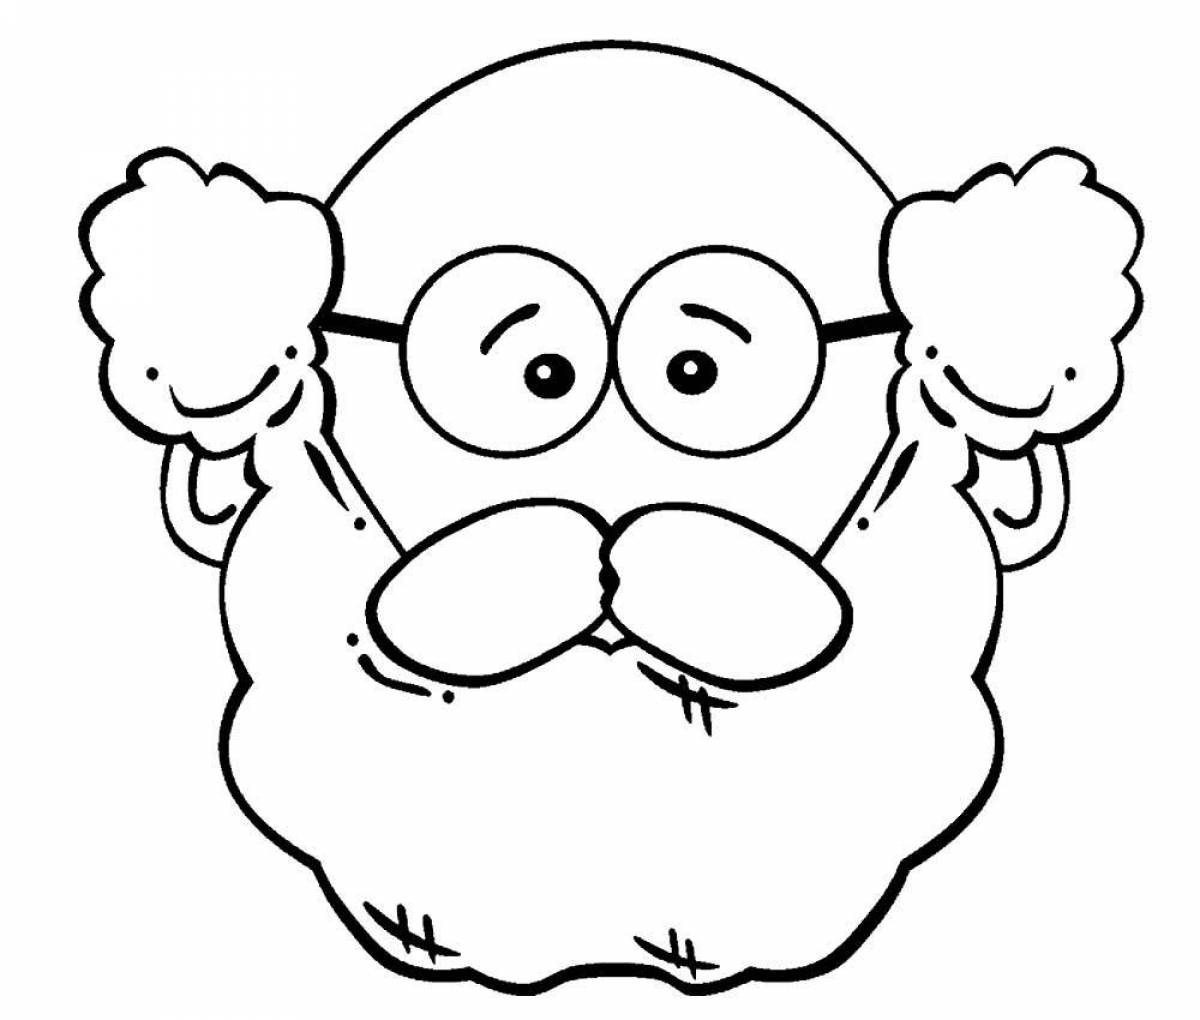 Humble grandfather coloring page